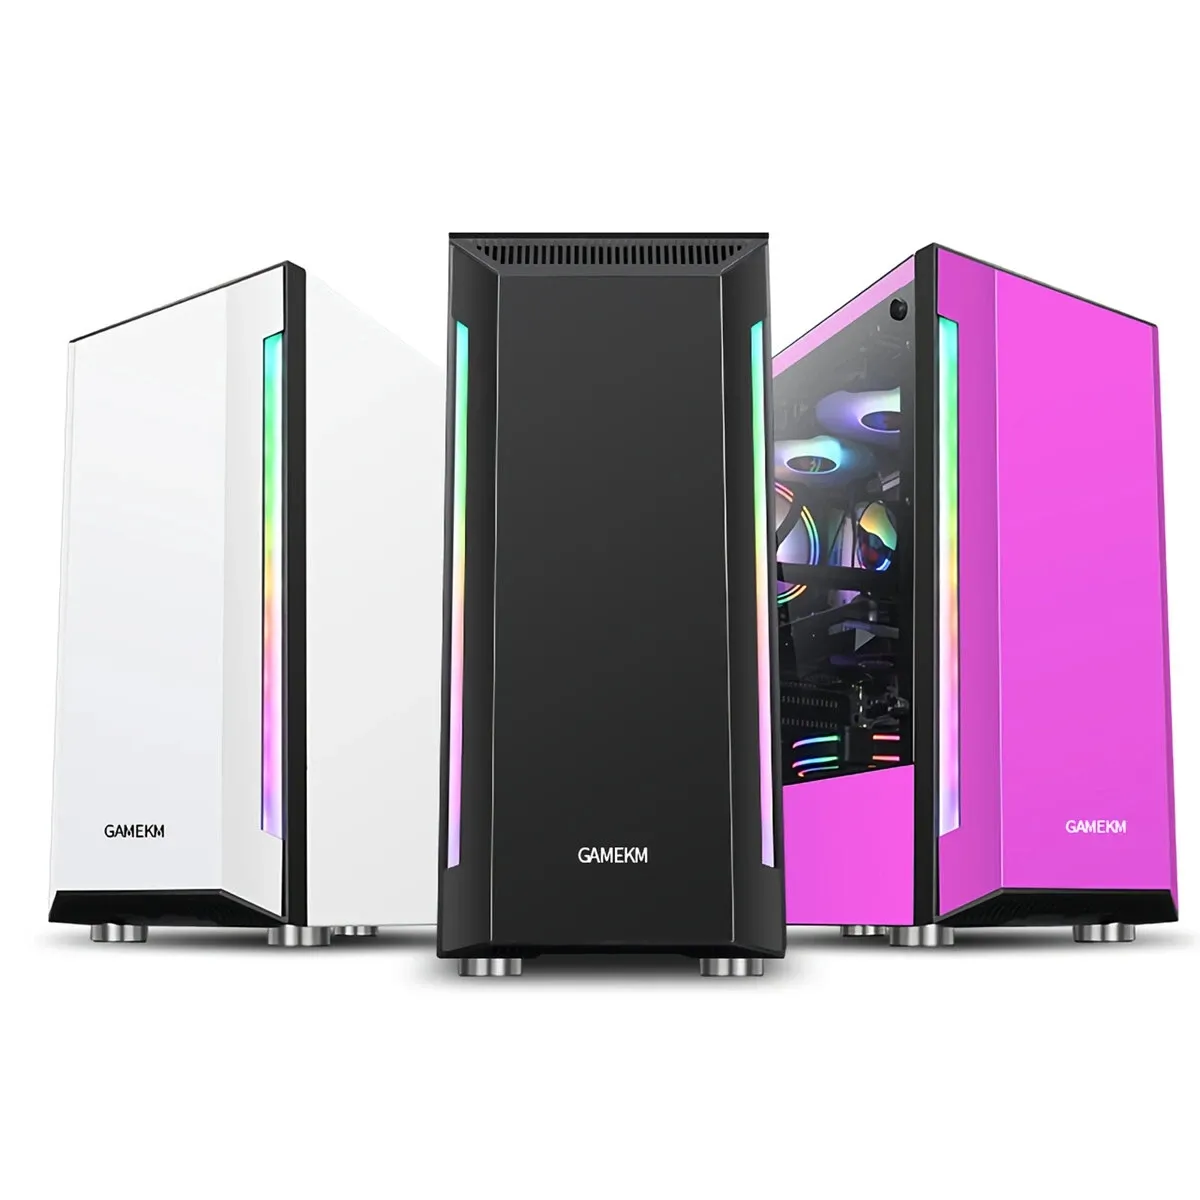 GAMEKM Desktop Computer Case ATX/M-ATX/ITX Acrylic Side Panel Water Cooling Dustproof RGB Gaming PC Shell for - Black